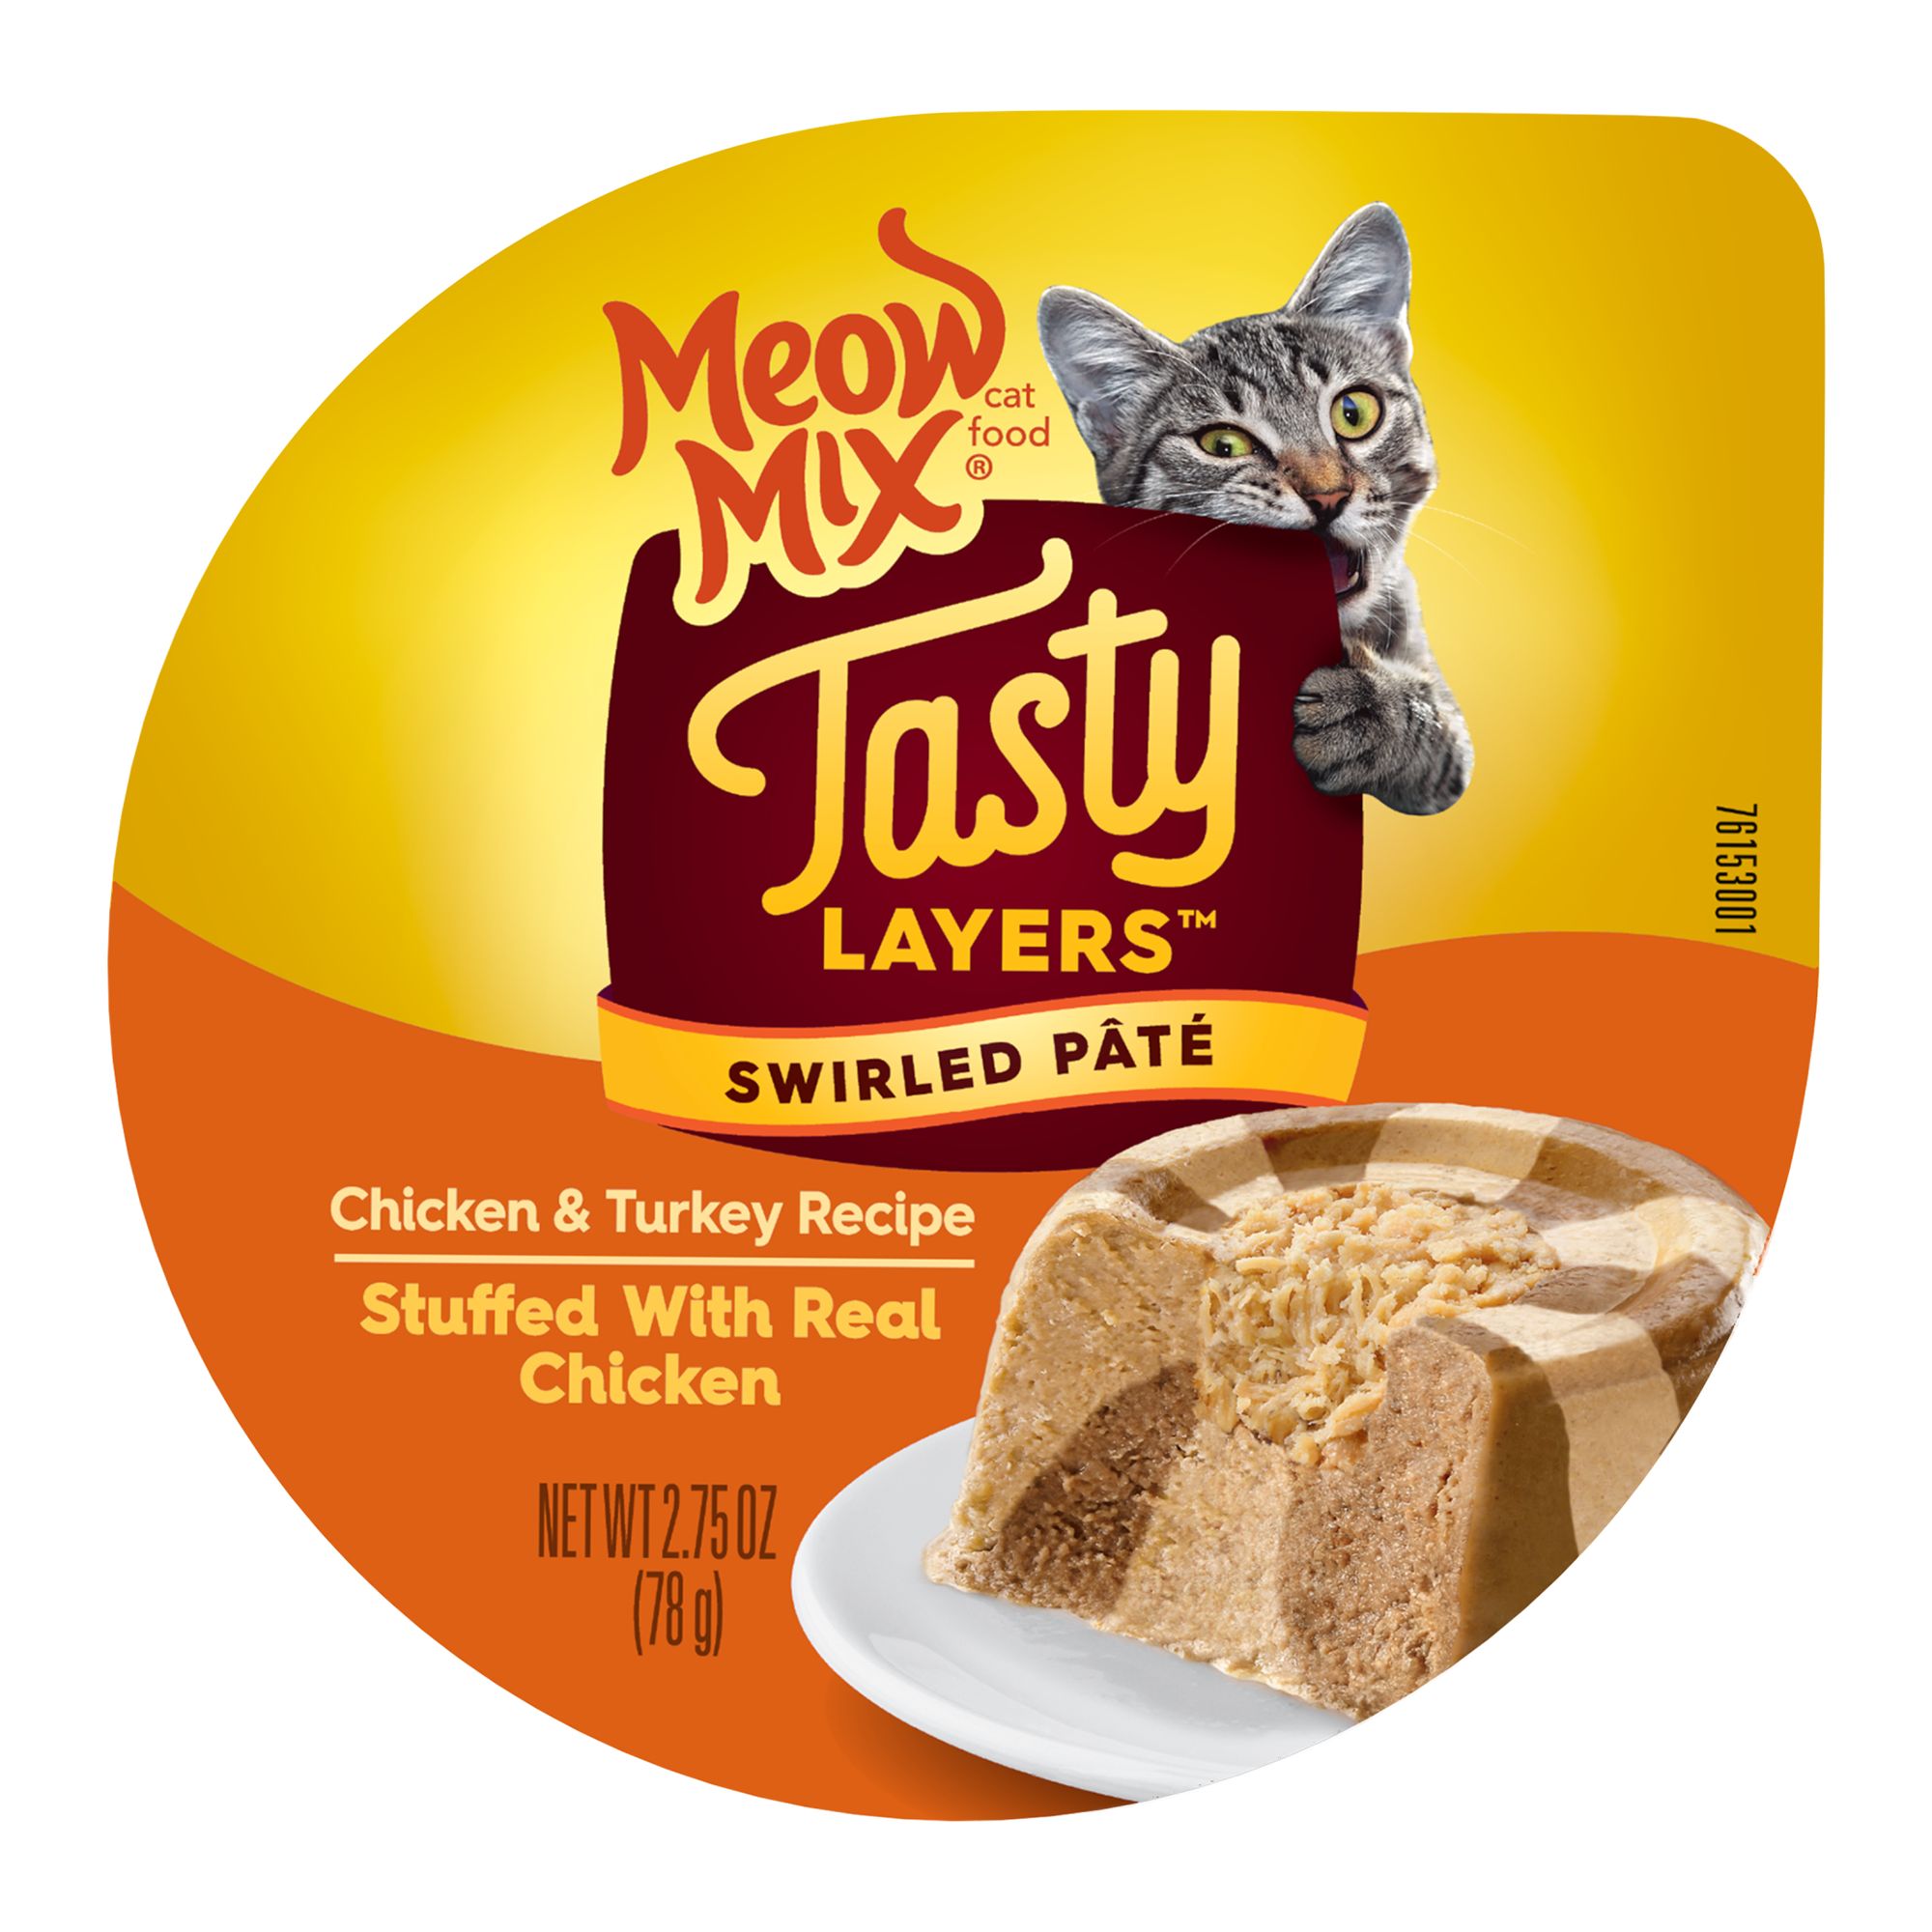 Meow Mix Tasty Layers Wet Cat Food Adult - Chicken, Turkey